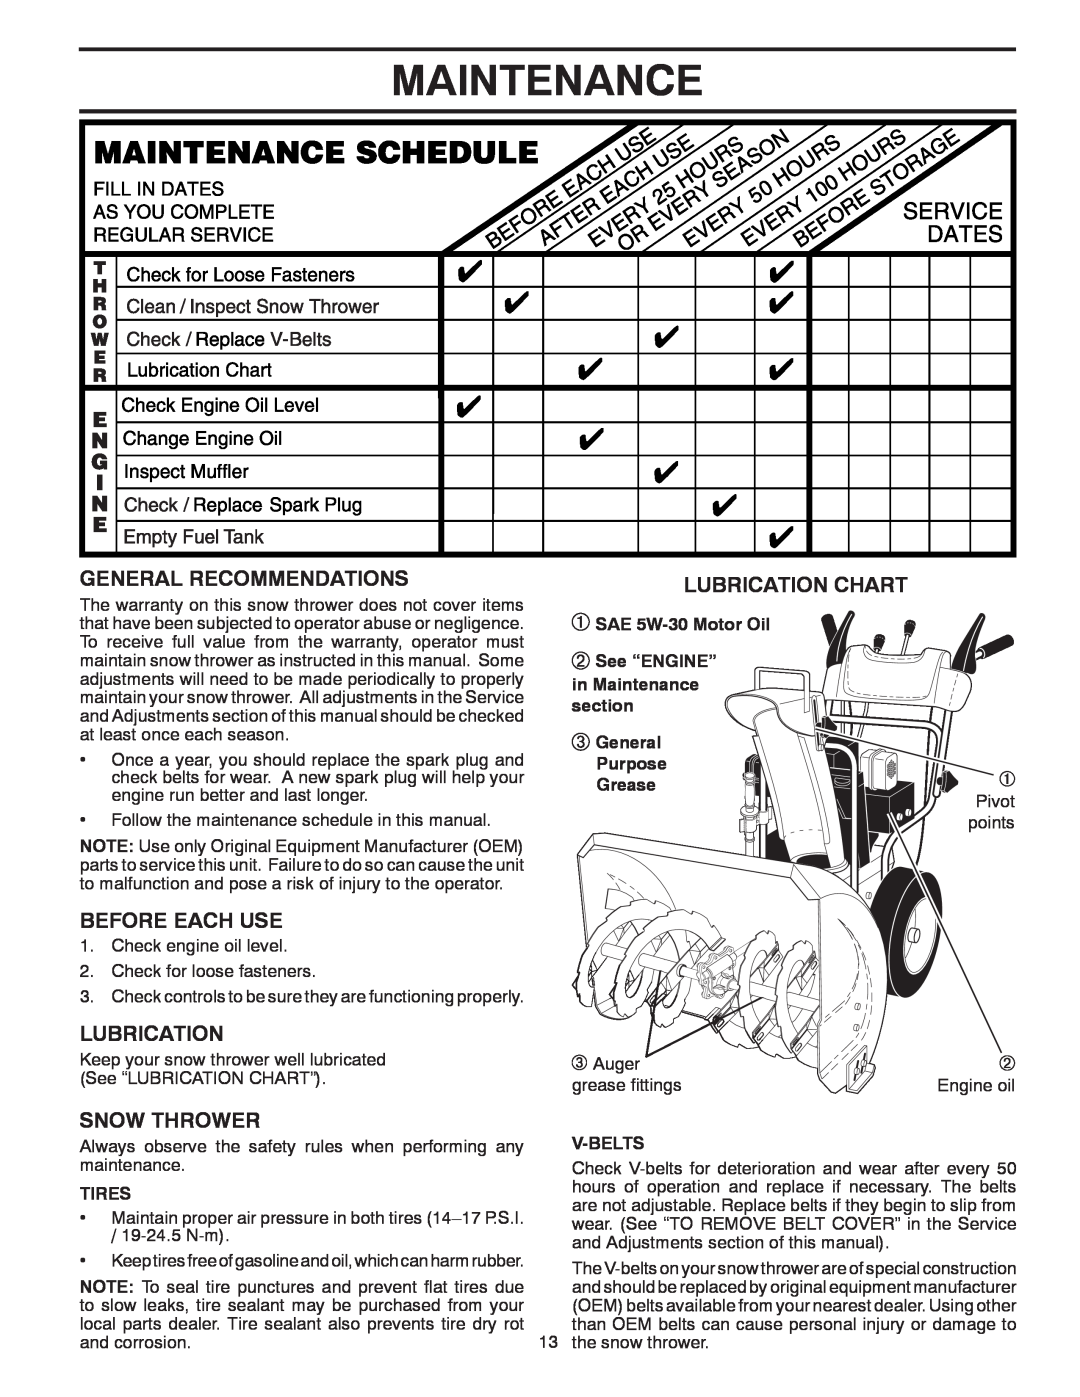 Poulan 415136 Maintenance, General Recommendations, Before Each Use, Lubrication Chart, Snow Thrower, Purpose Grease 